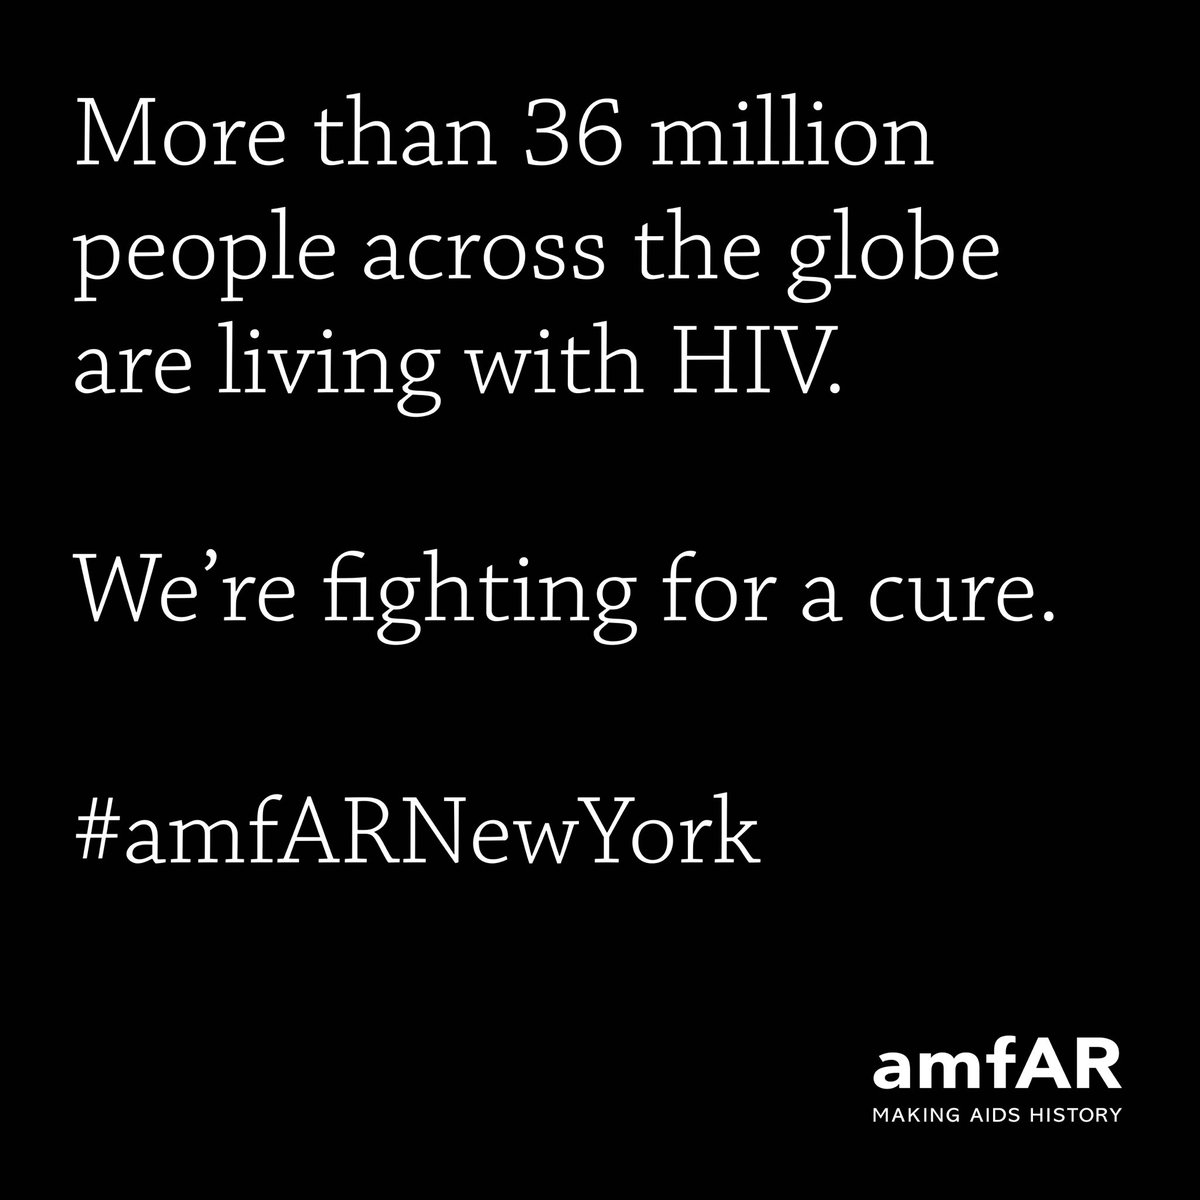 Proud to be supporting @amfAR at the #amfARNewYork Gala this evening.All in support of the global fight to end #AIDS https://t.co/B3DP7mxbqI